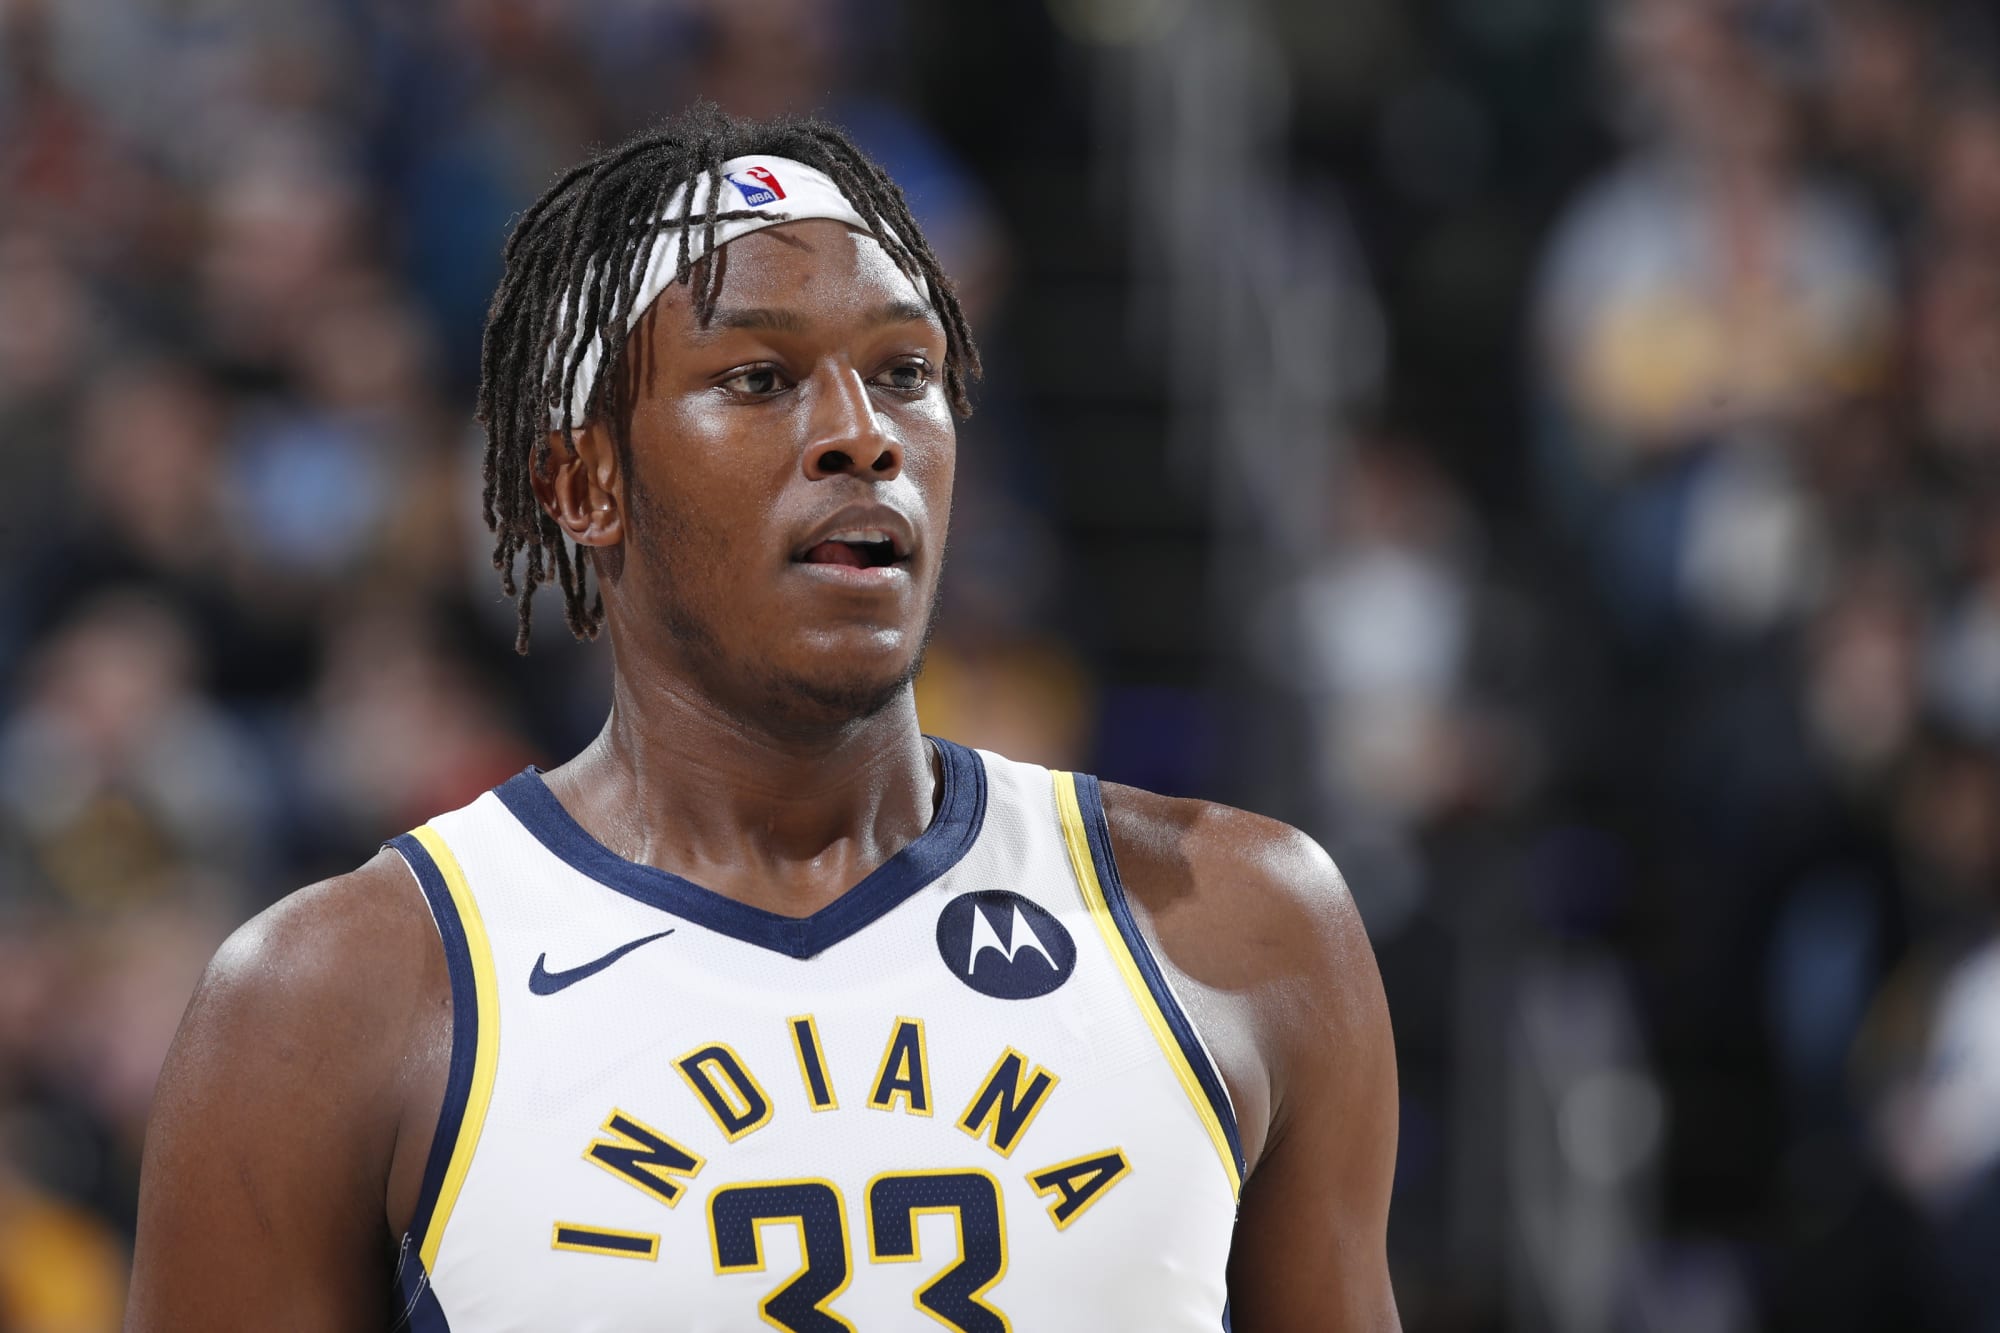 Myles Turner is more than ready to keep bombing it from deep for the Pacers